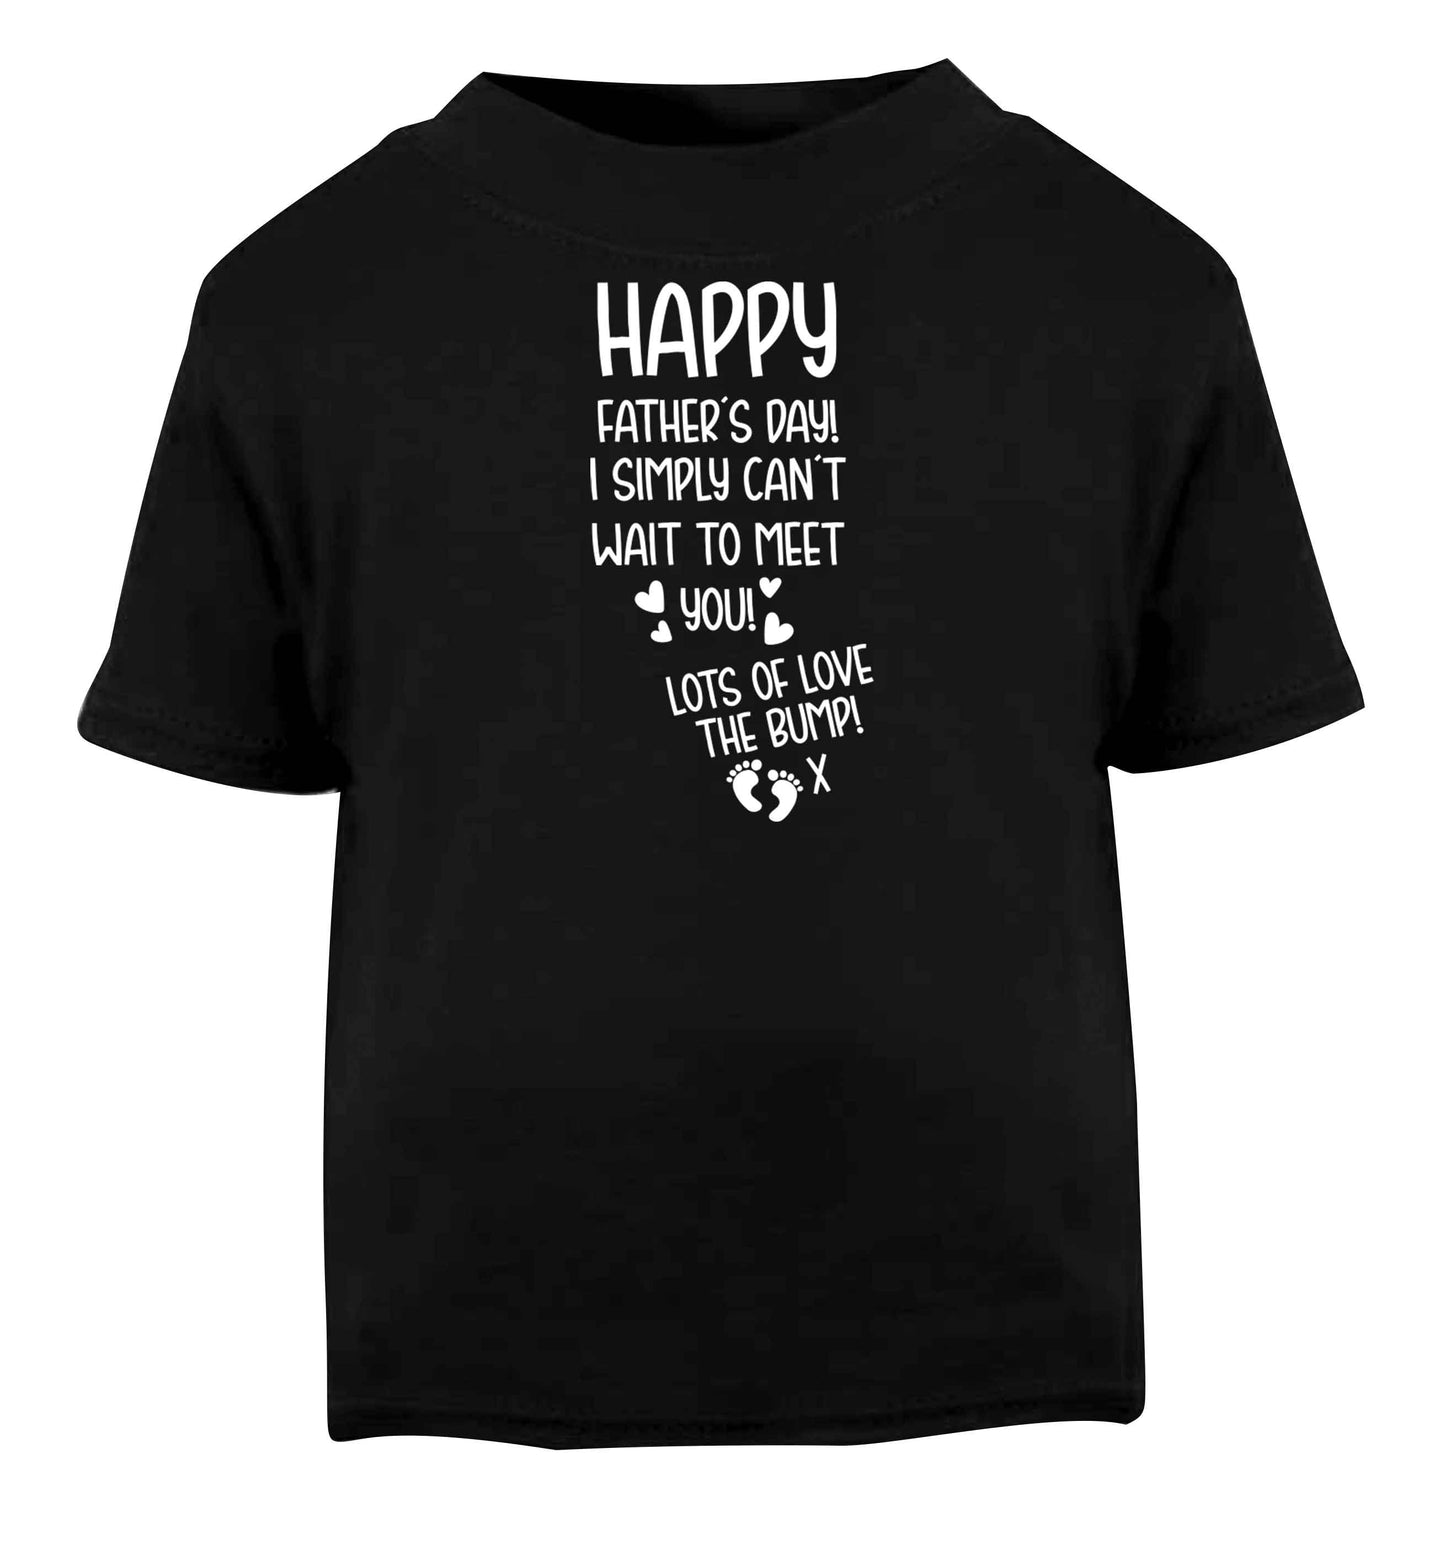 Happy Father's day daddy I can't wait to meet you lot's of love the bump! Black baby toddler Tshirt 2 years